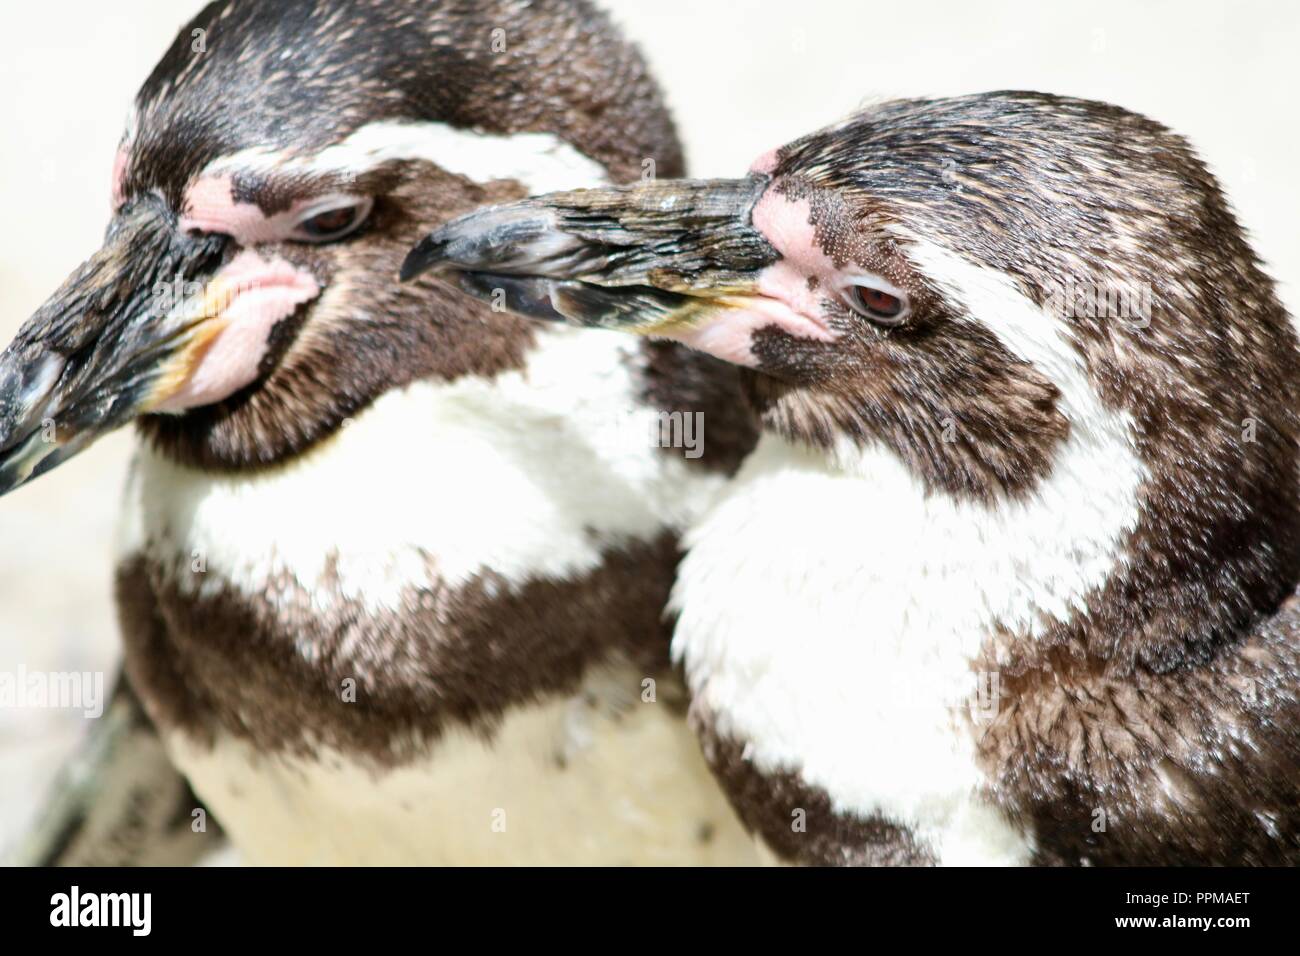 Humboldt penguins at the St Louis Zoo Stock Photo: 220494144 - Alamy